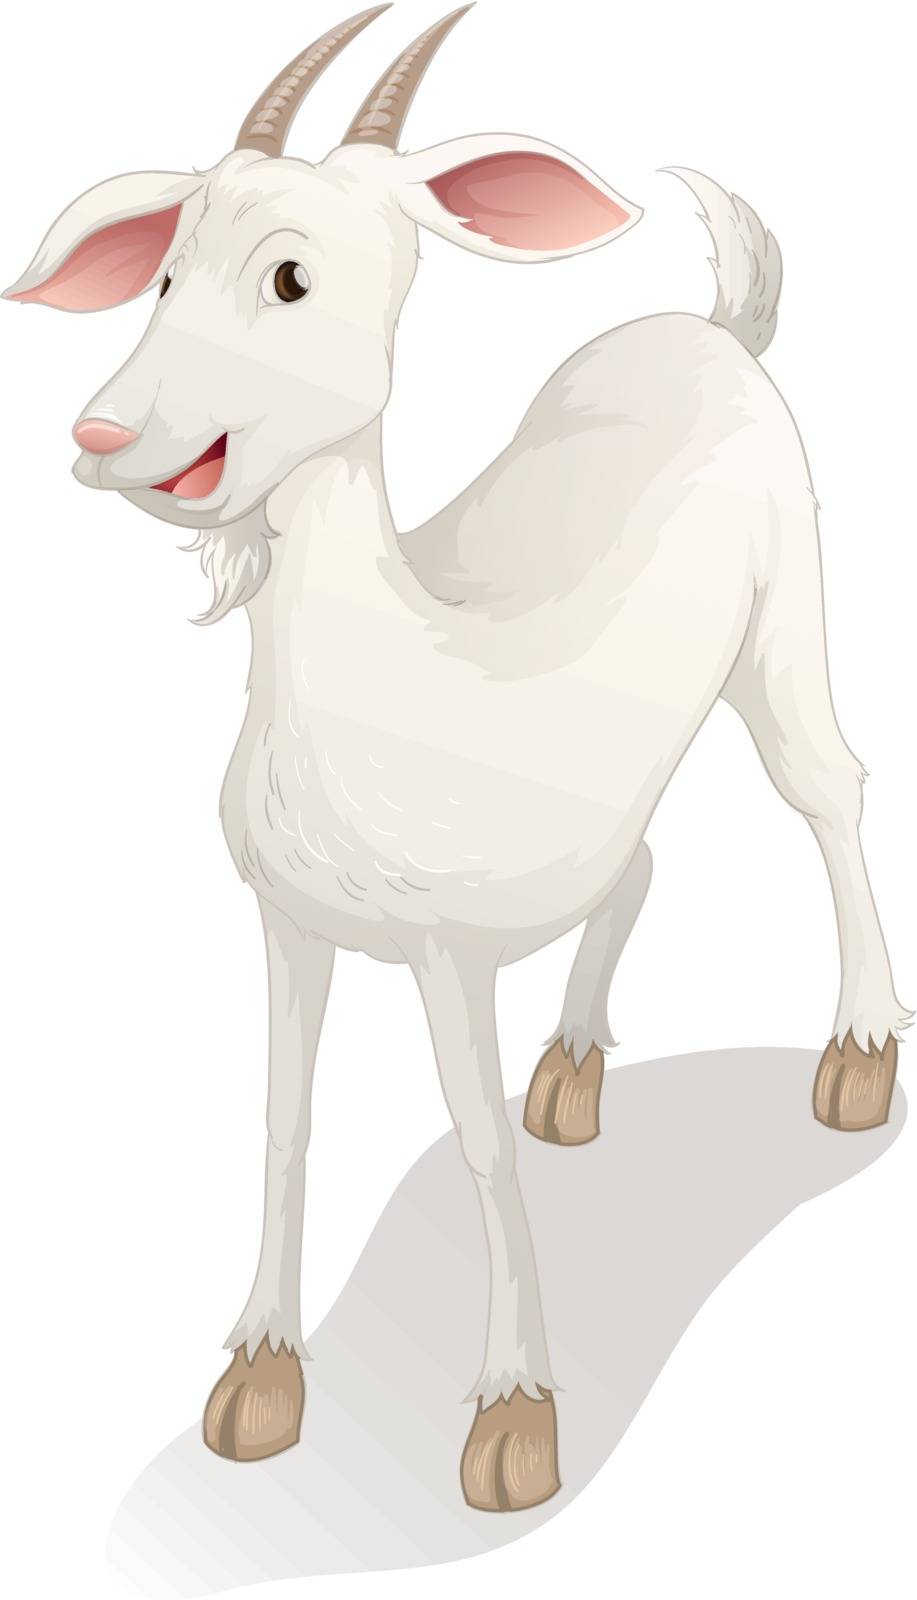 illustration of a goat on a white background